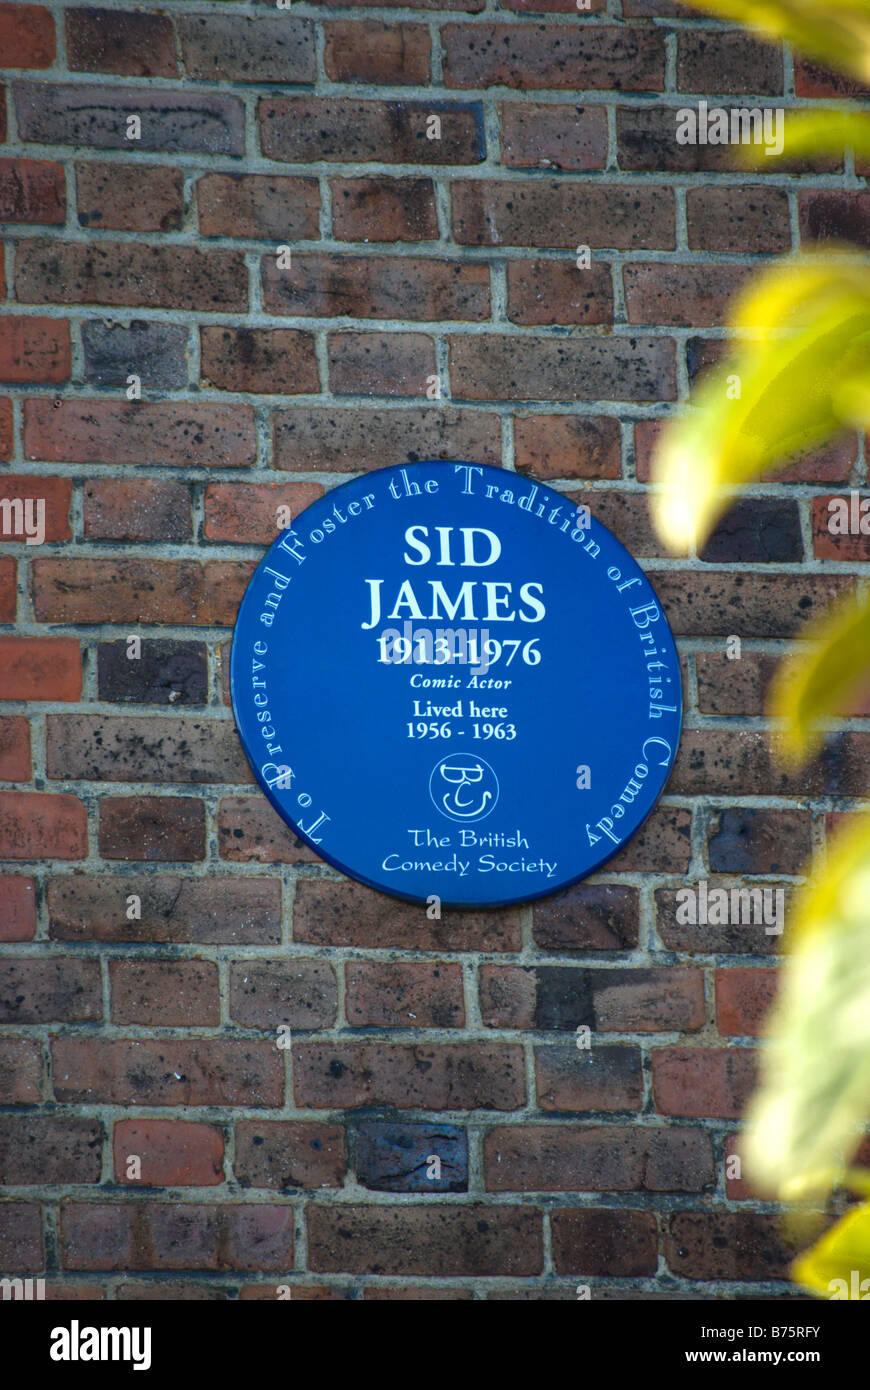 british comedy society blue plaque marking a former home of comic actor sid james, ealing, west london, england Stock Photo